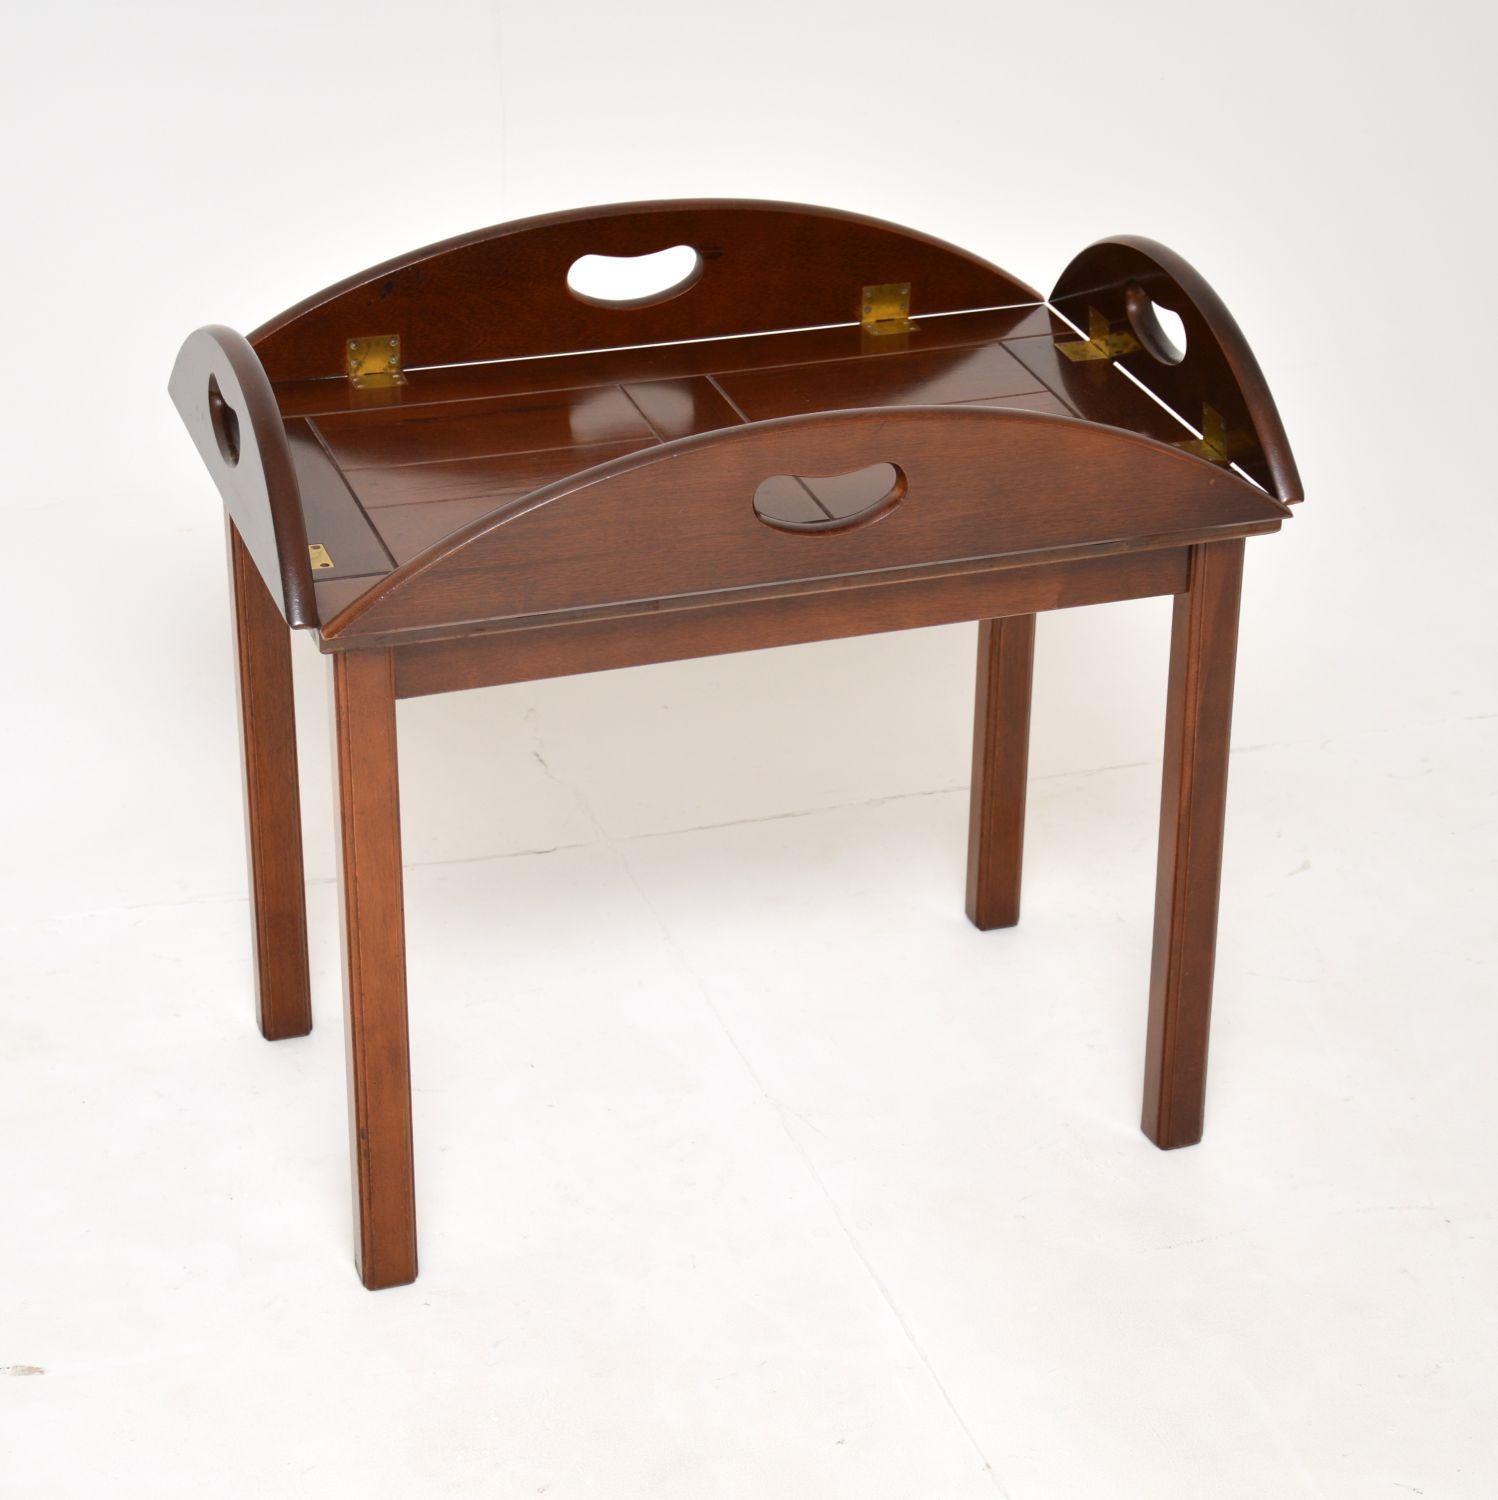 A smart and functional antique butlers tray table. This is in the Georgian style, it was made in England and dates from around the 1950’s.

It is of great quality, it is a useful and versatile size. This would work well as a coffee table or as an